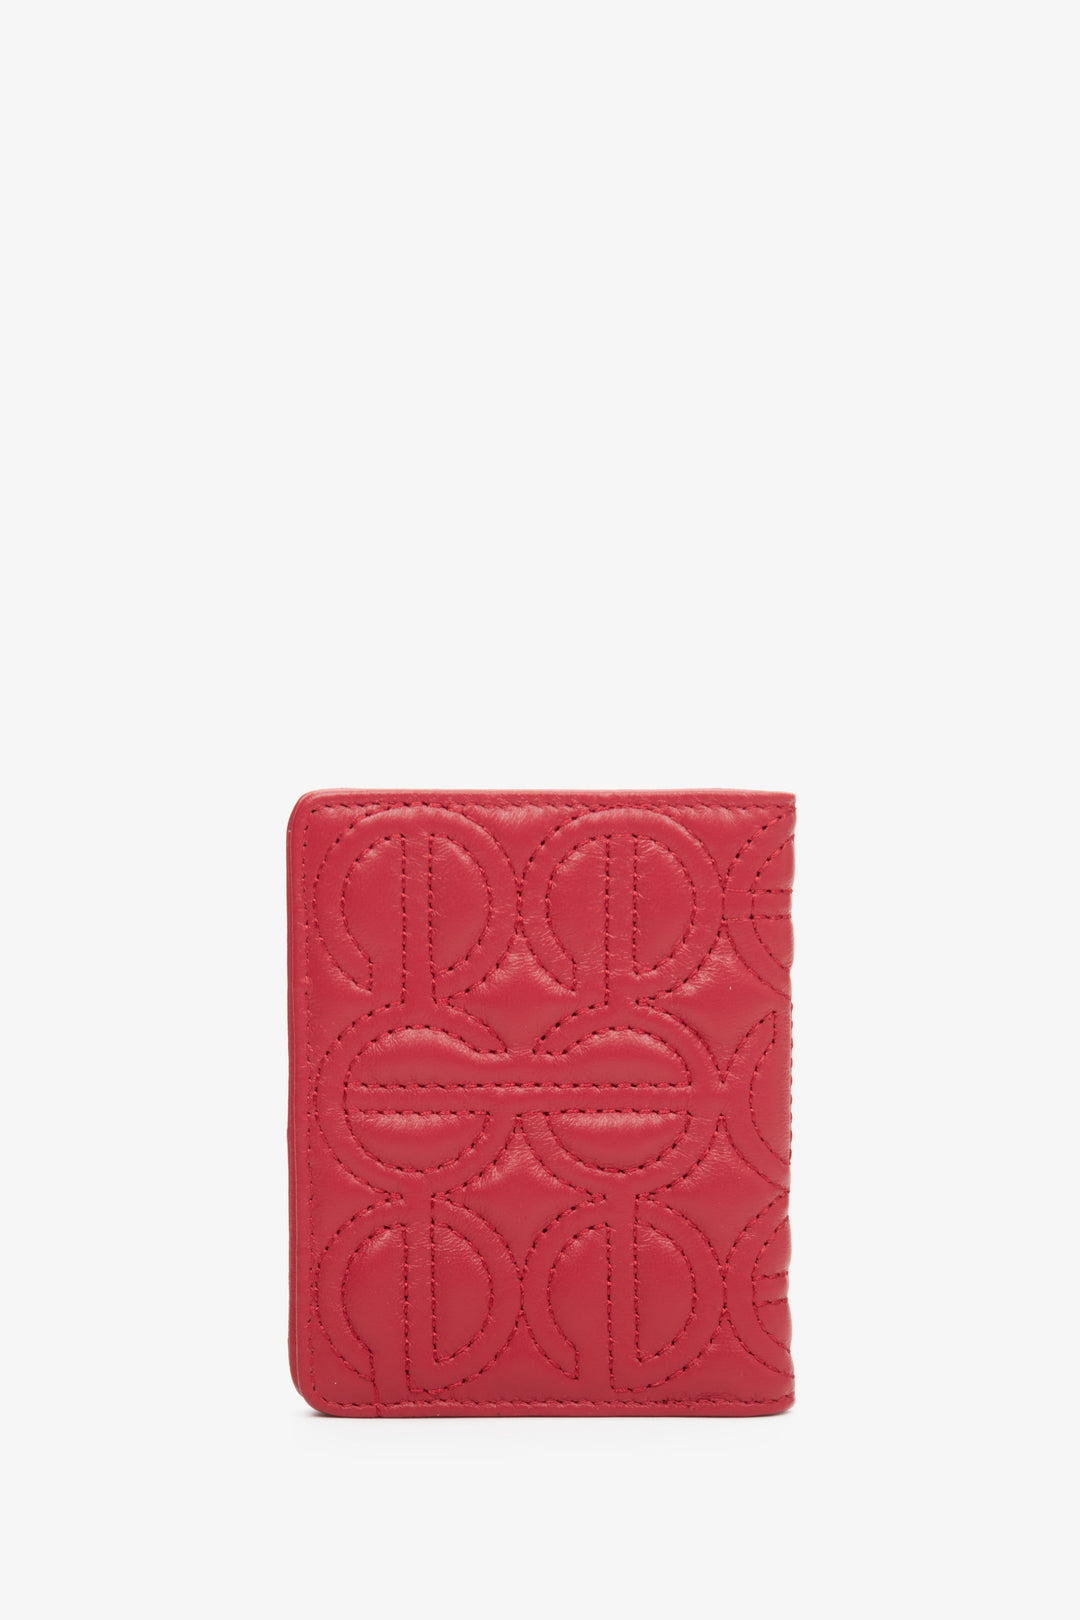 Small women's red card leather wallet by Estro with embossed logo.